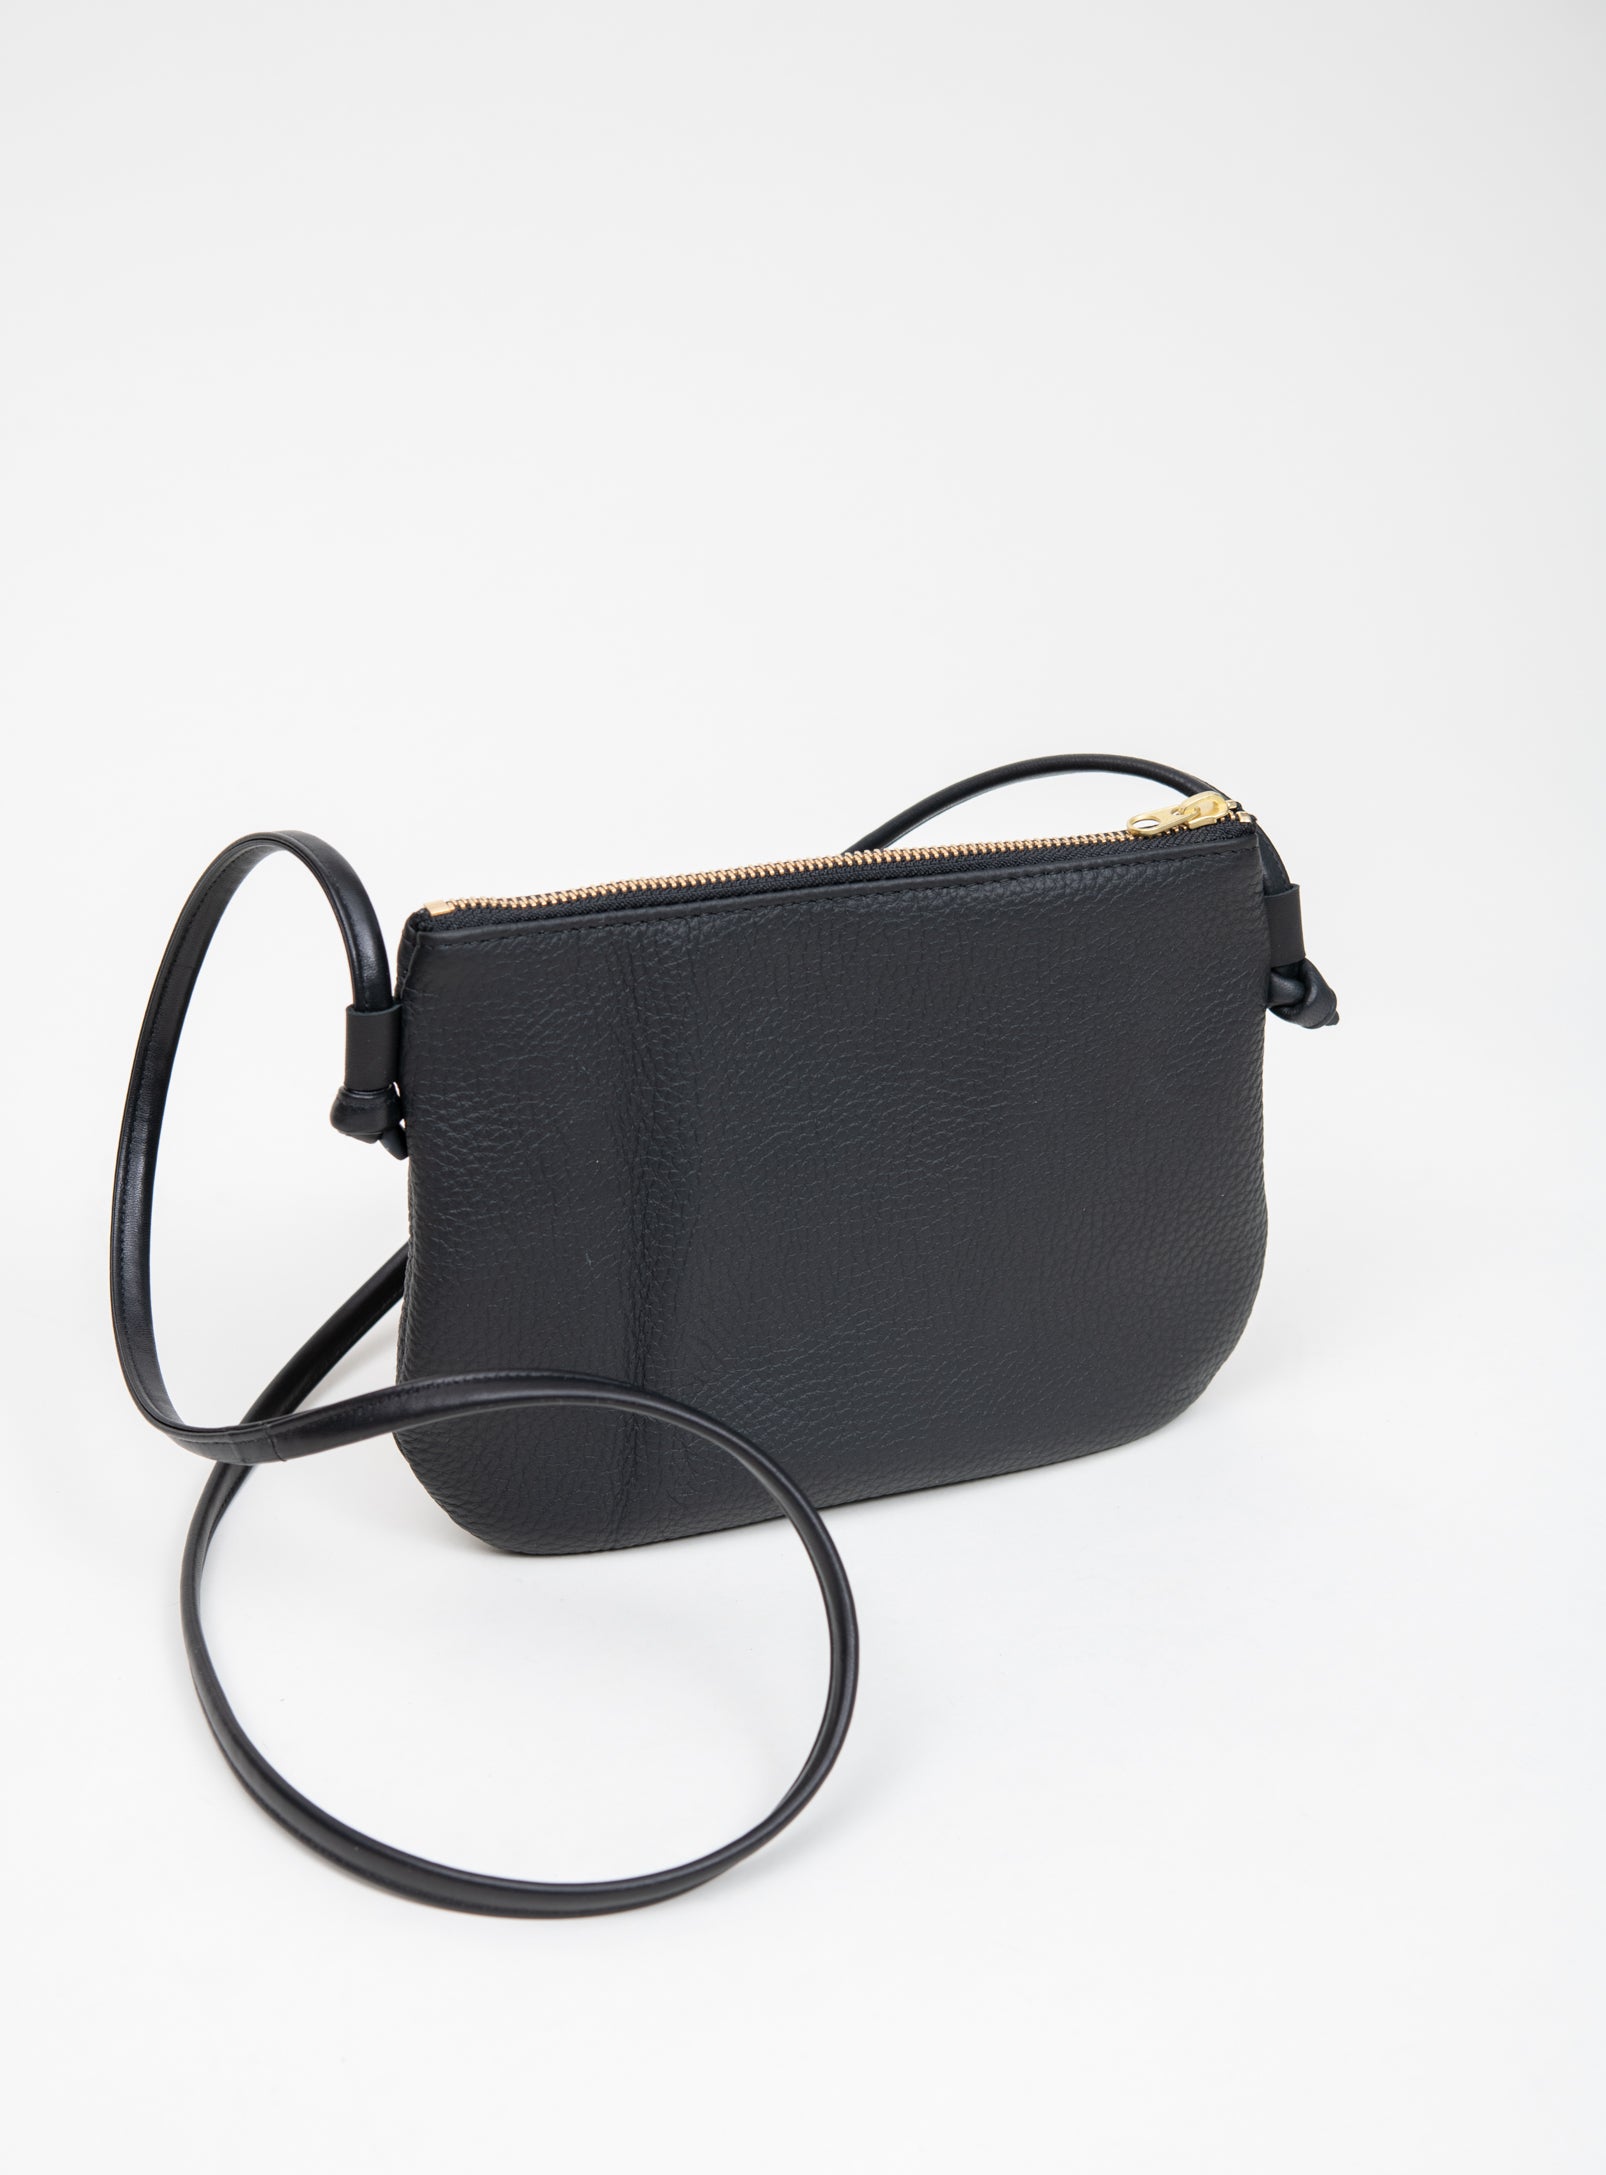 Black Leather Hobo Bag - Slouchy Leather Purse For Women | Laroll Bags